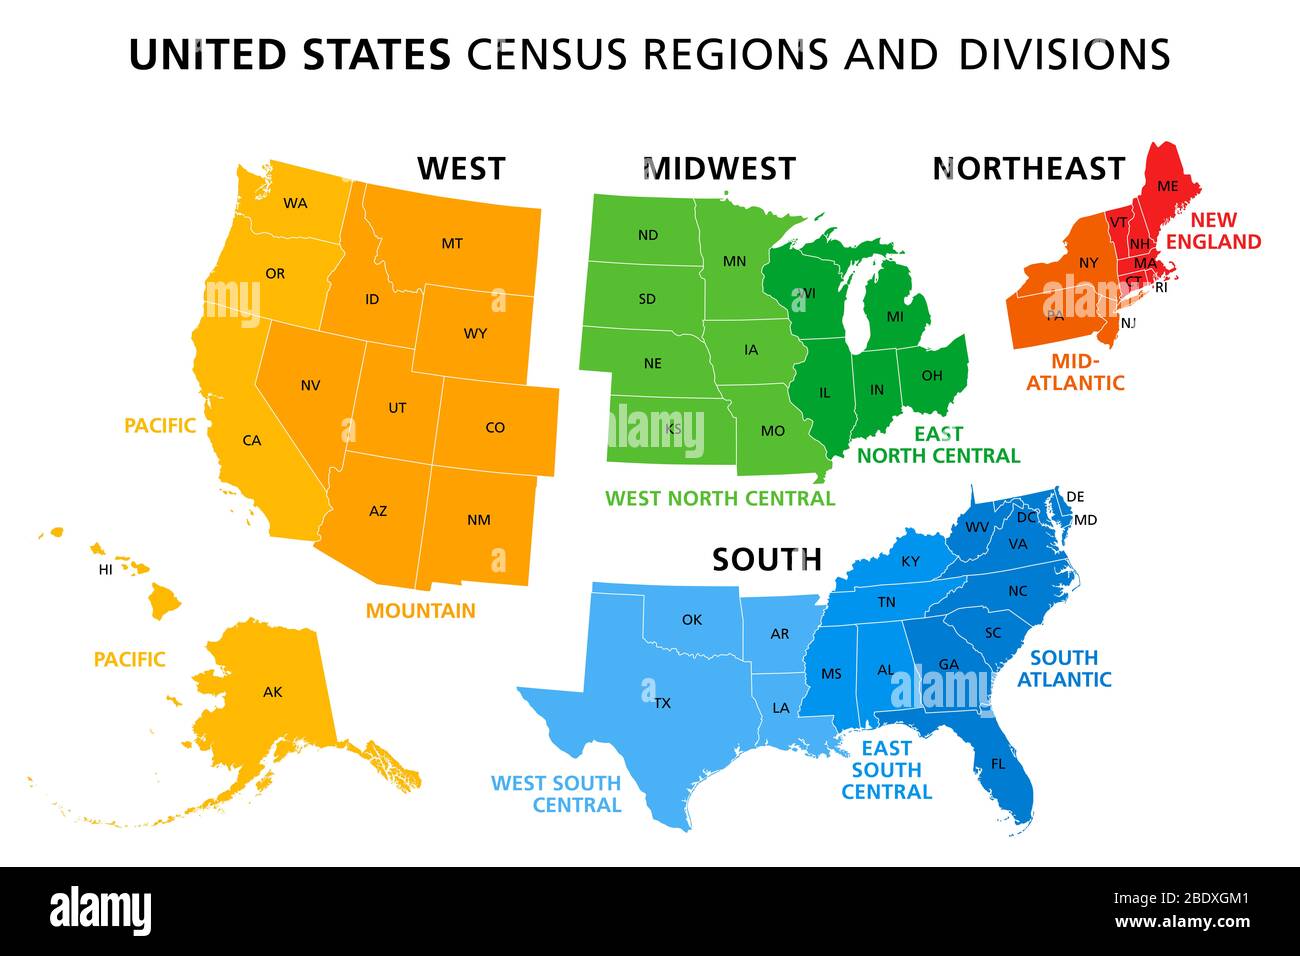 Map Of United States Split Into Census Regions And Divisions